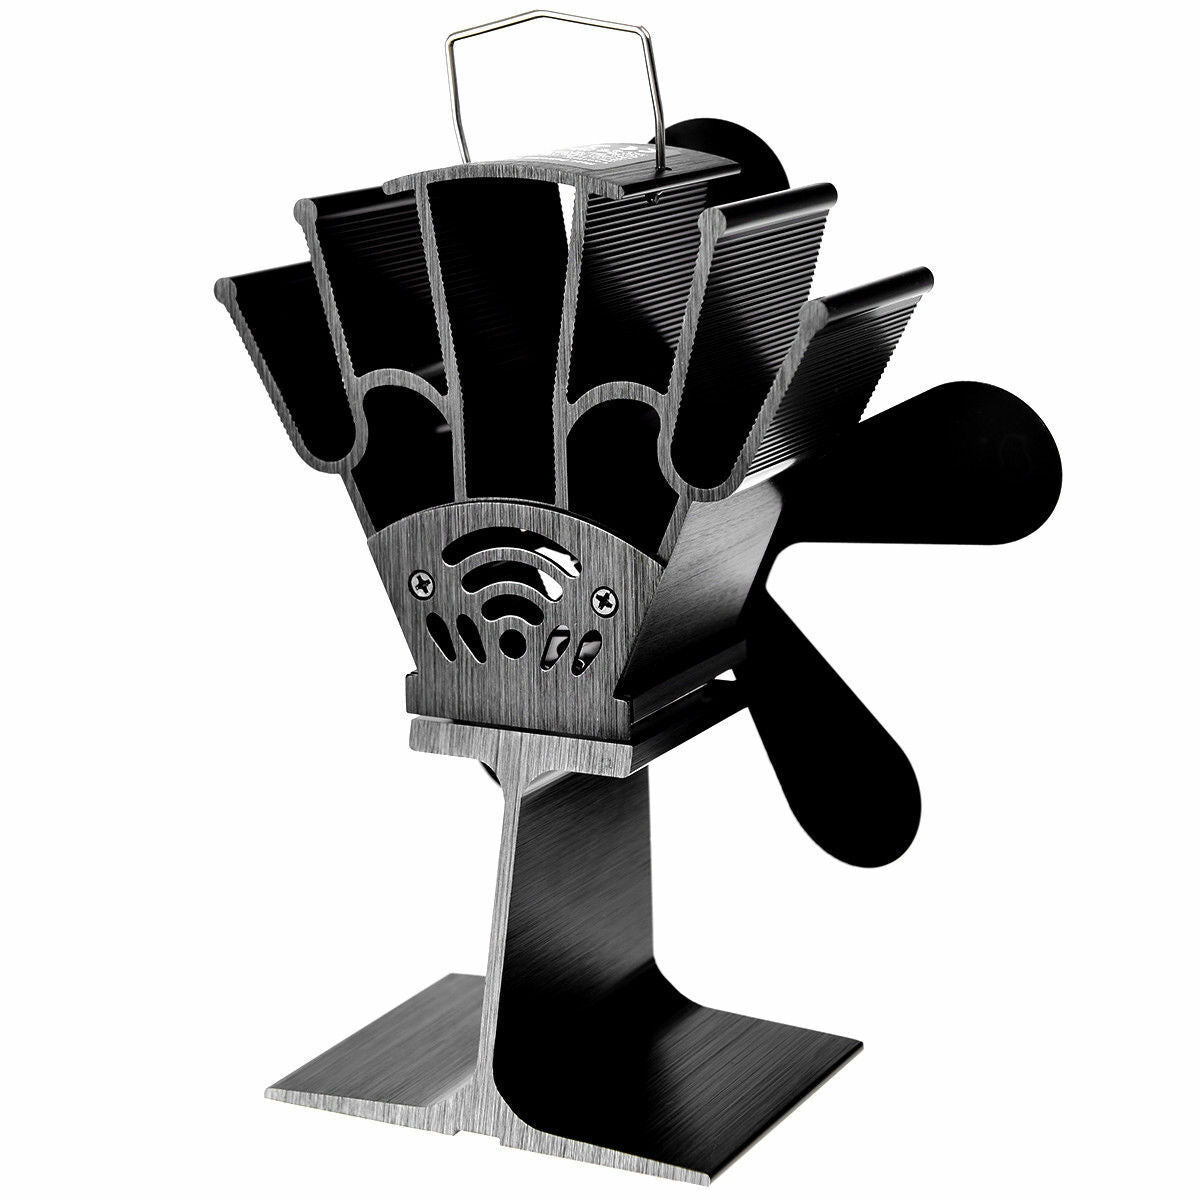 Stove Fan with 5 Blades Self Starting and Self Regulating Features